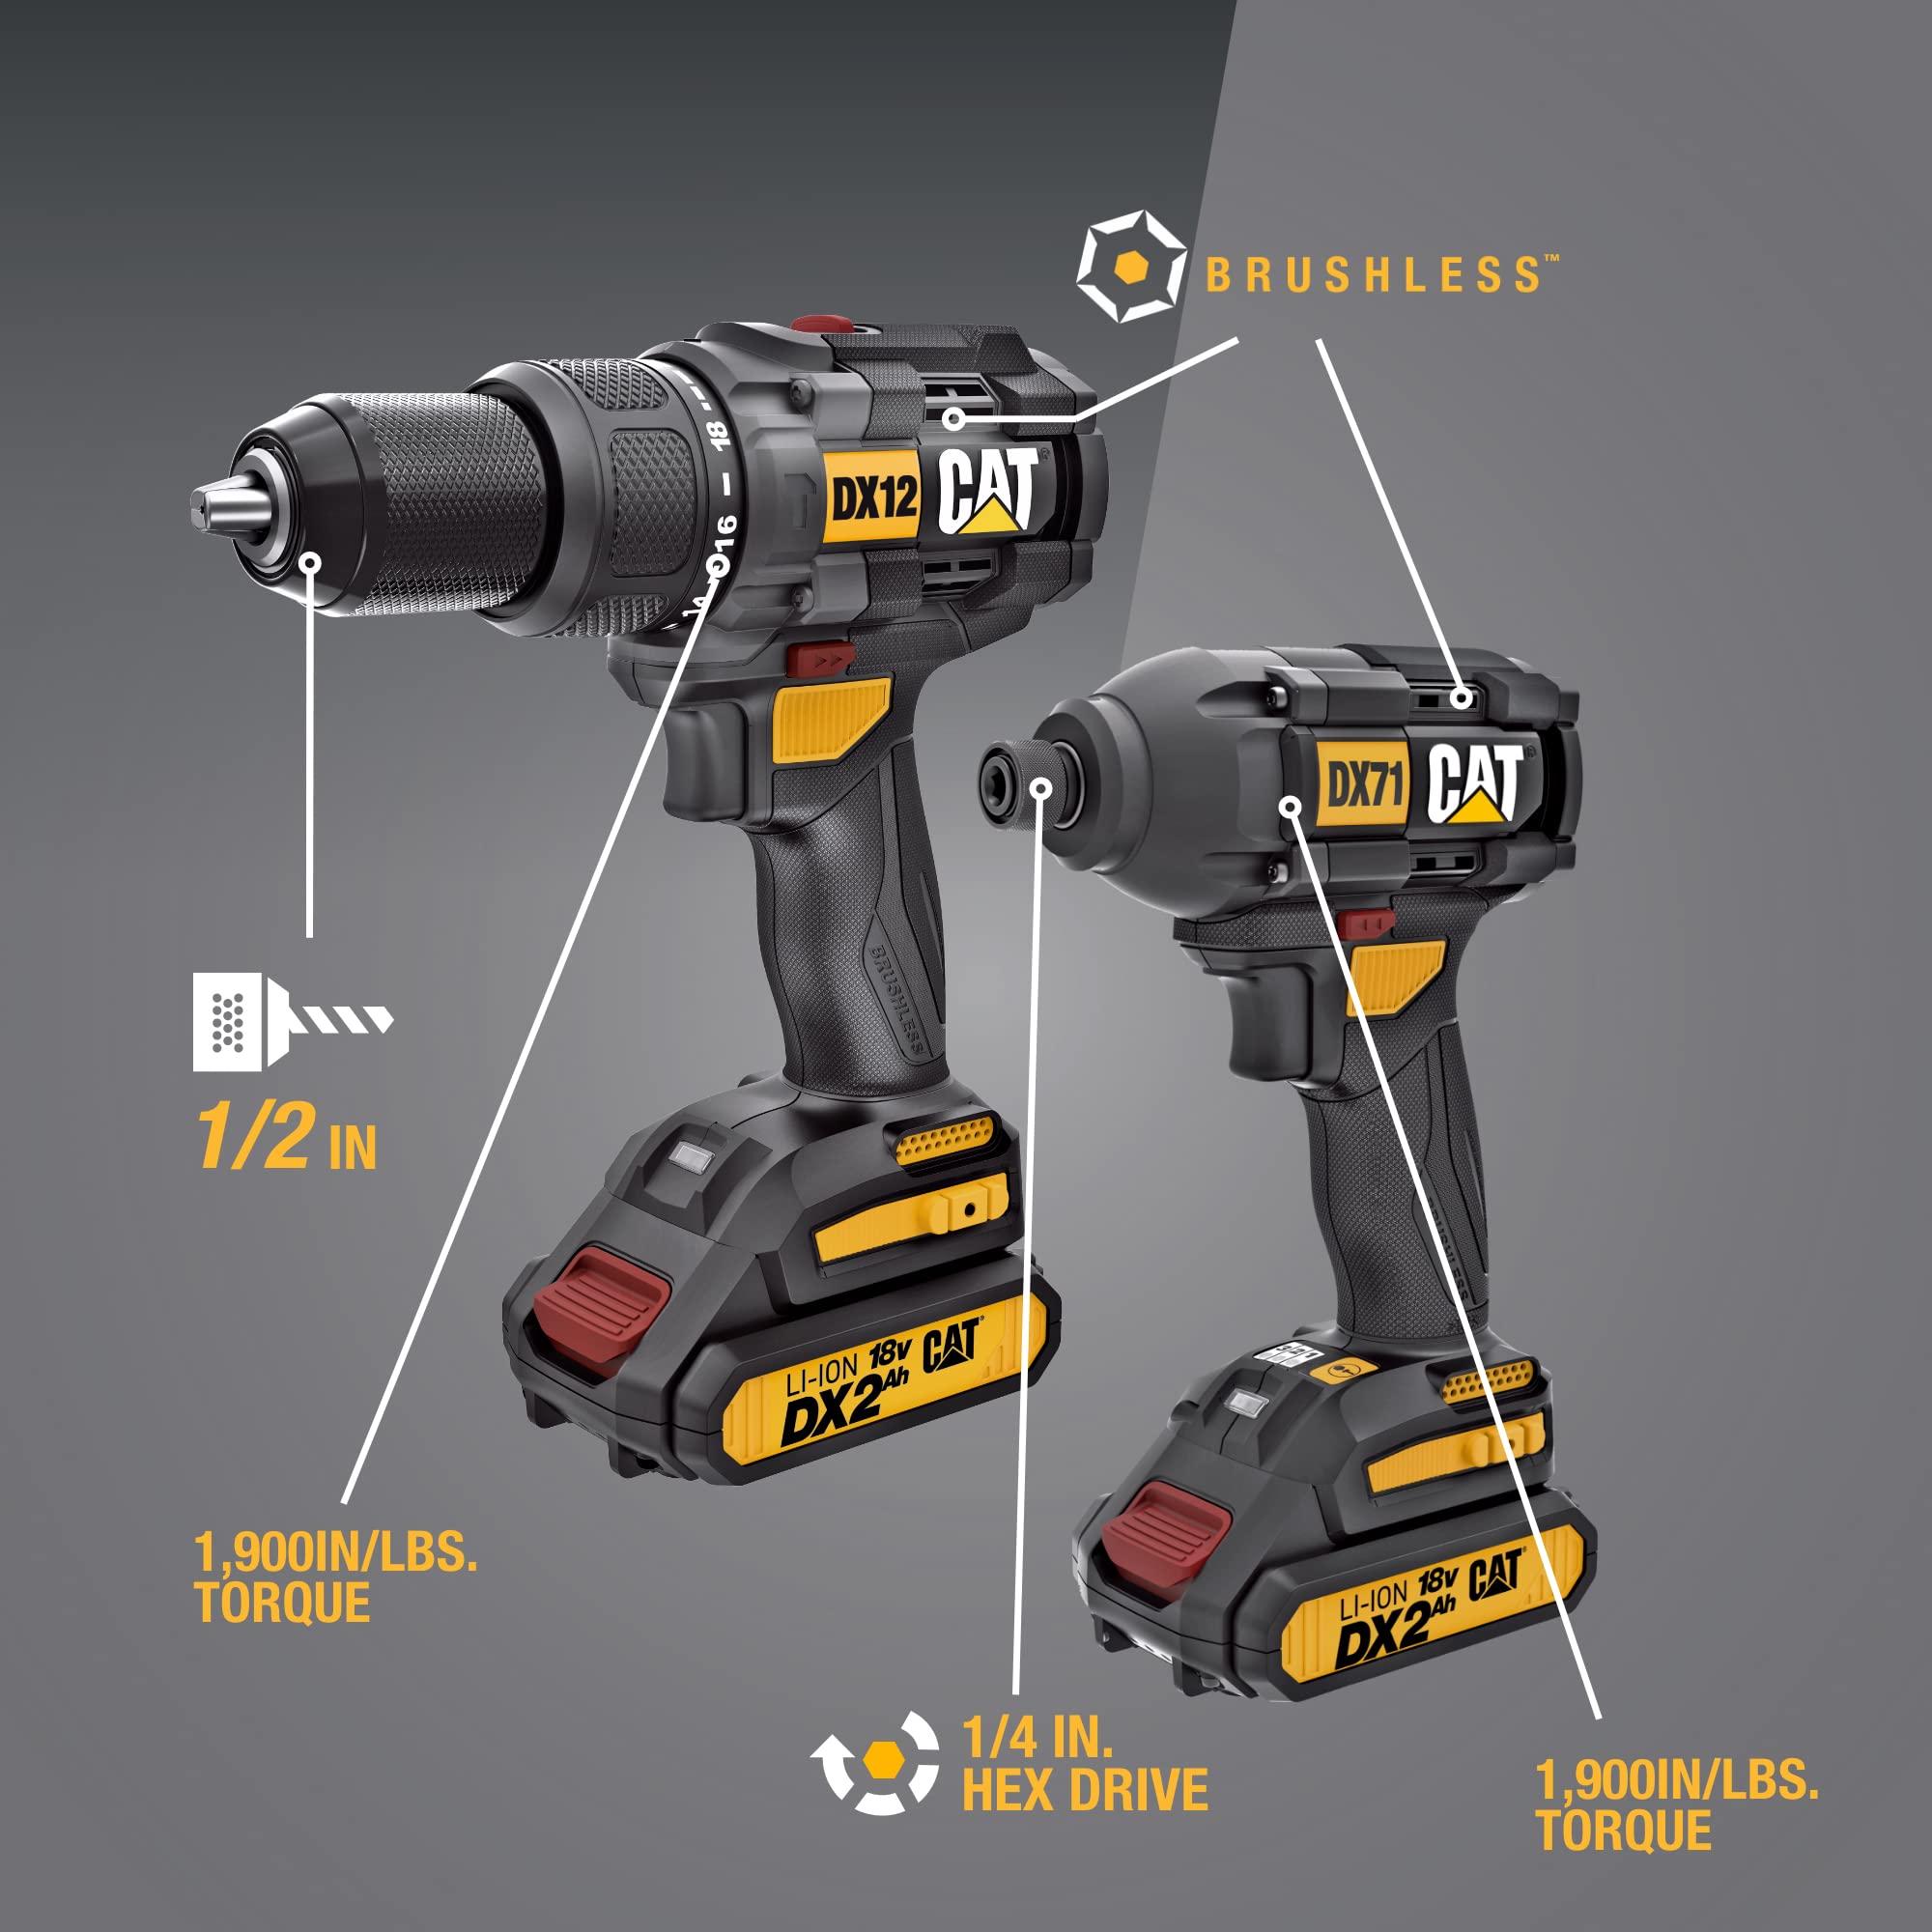 Cat® 18V 1 FOR ALL Cordless Hammer Drill & Impact Driver Combo Kit with 2 Batteries -DX12K, Black